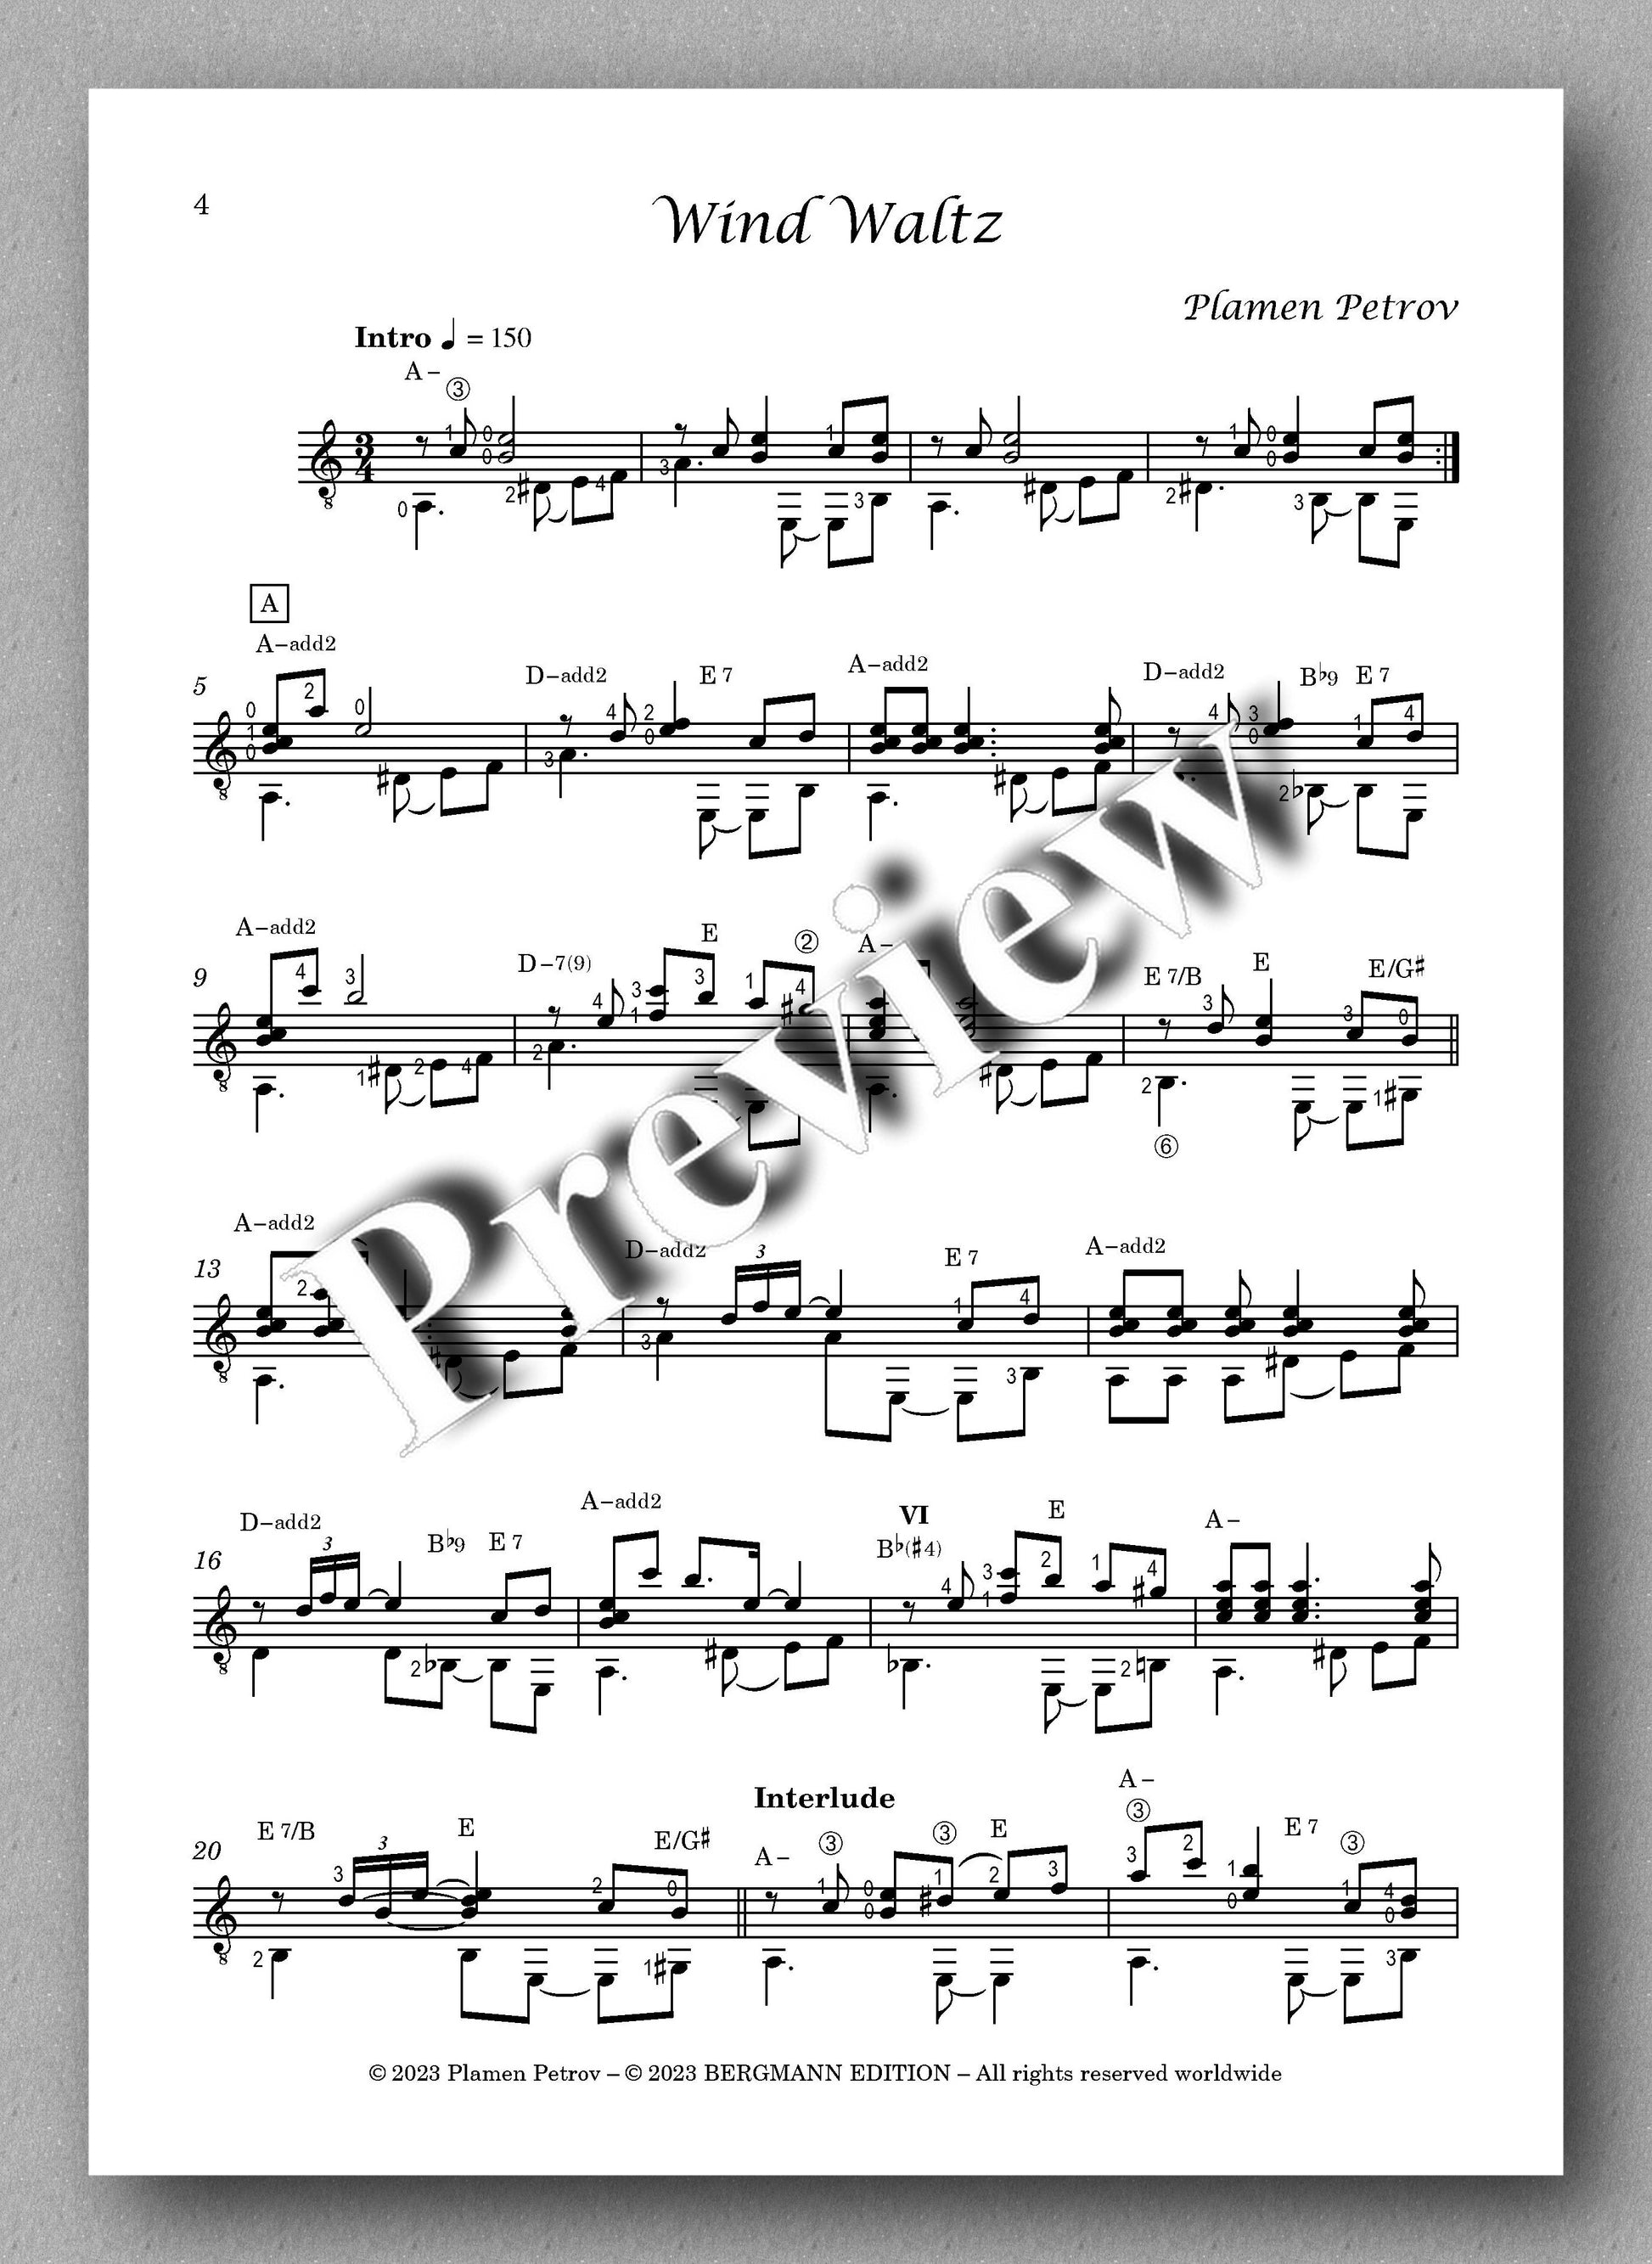 Wind Waltz by Plamen Petrov - preview of the music score 1